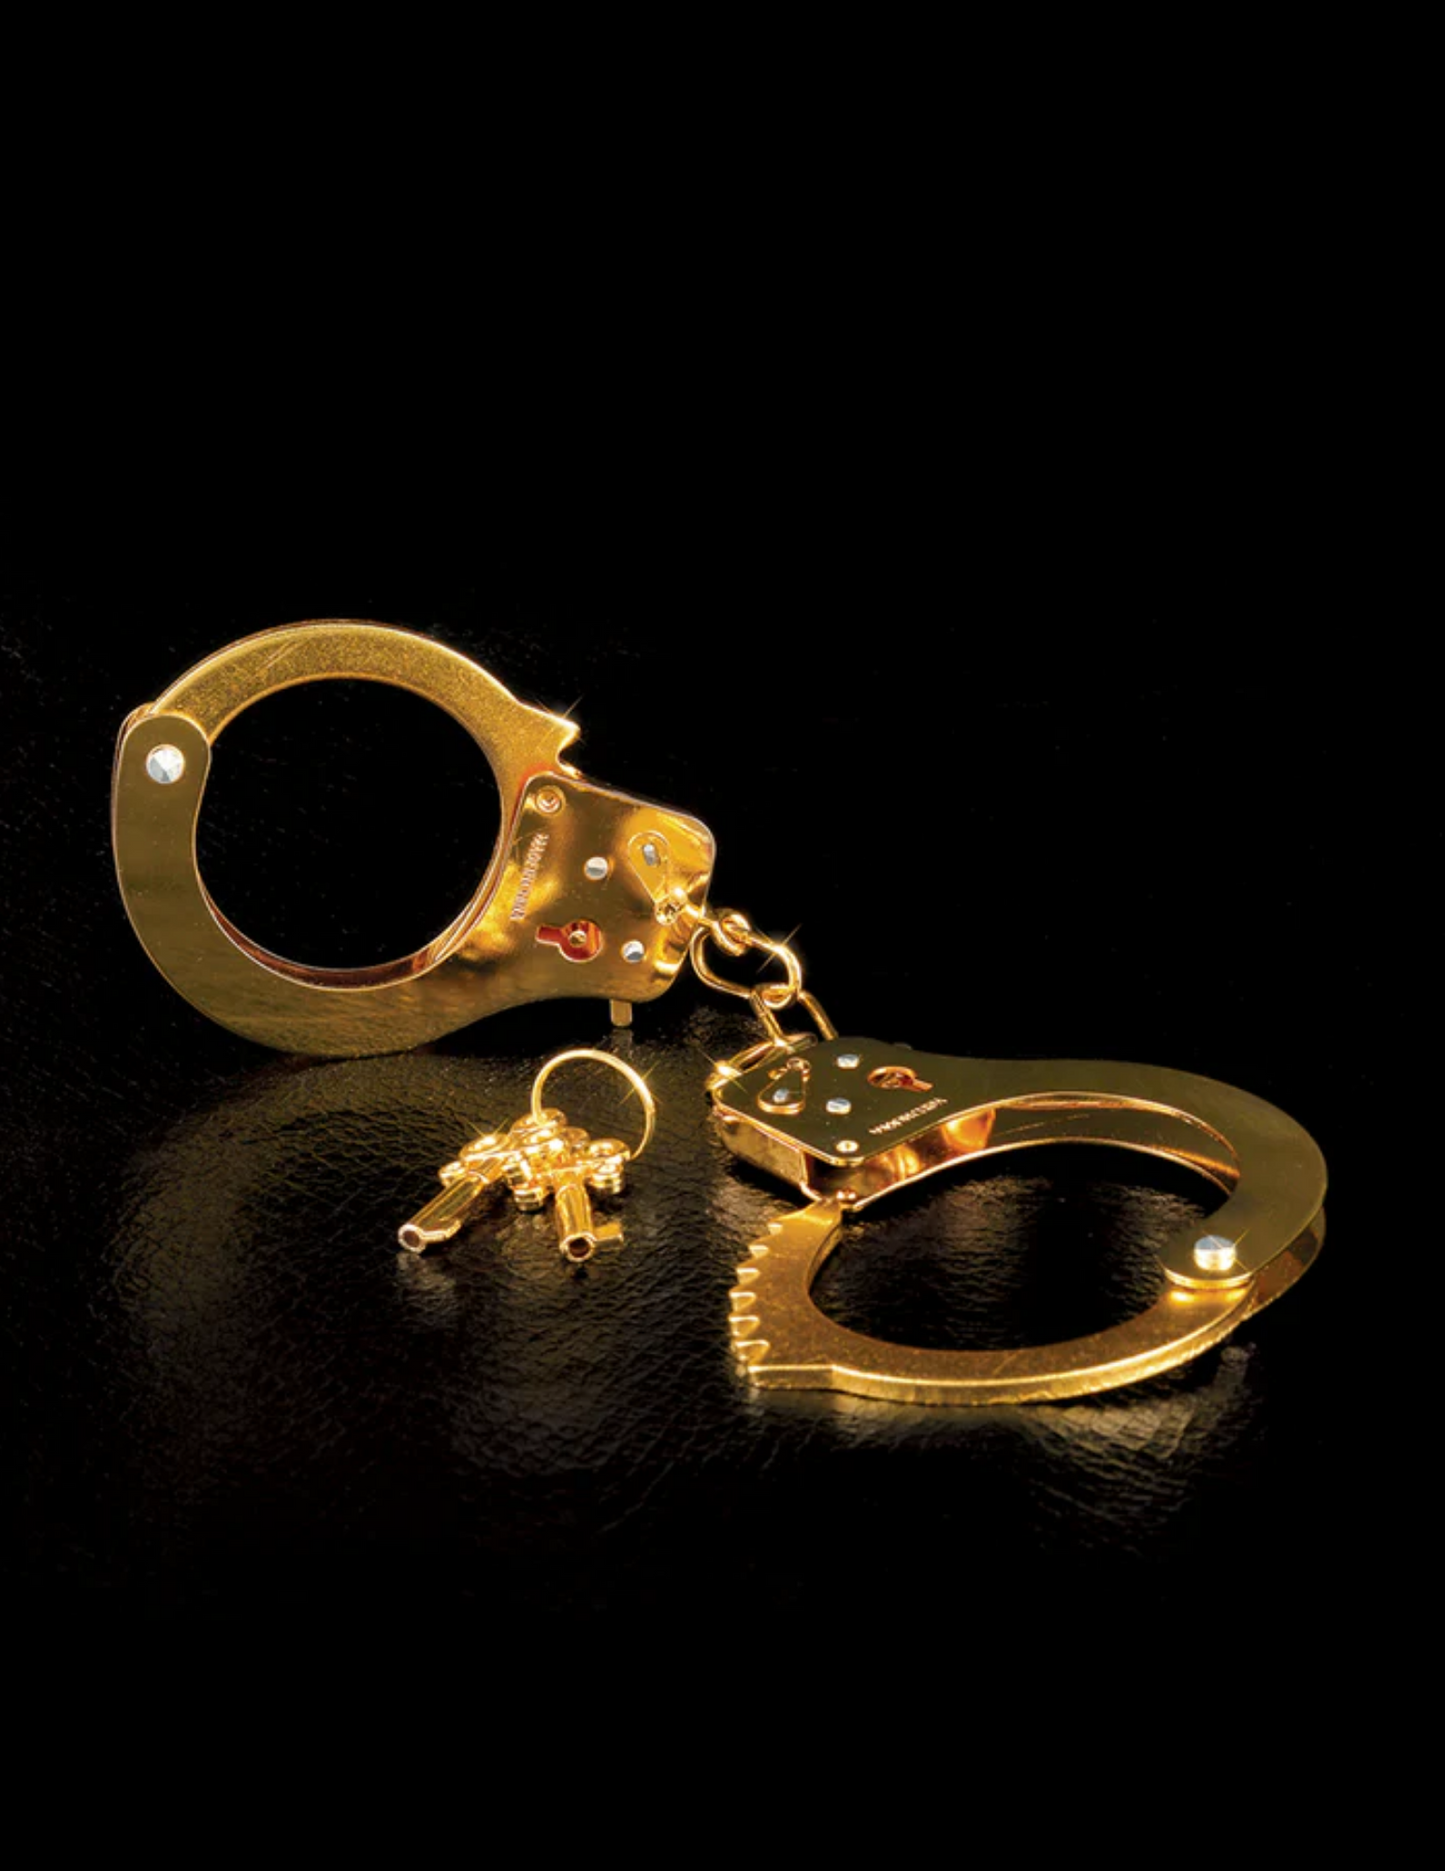 Photo of the Fetish Fantasy Gold Metal Cuffs from Pipedreams.